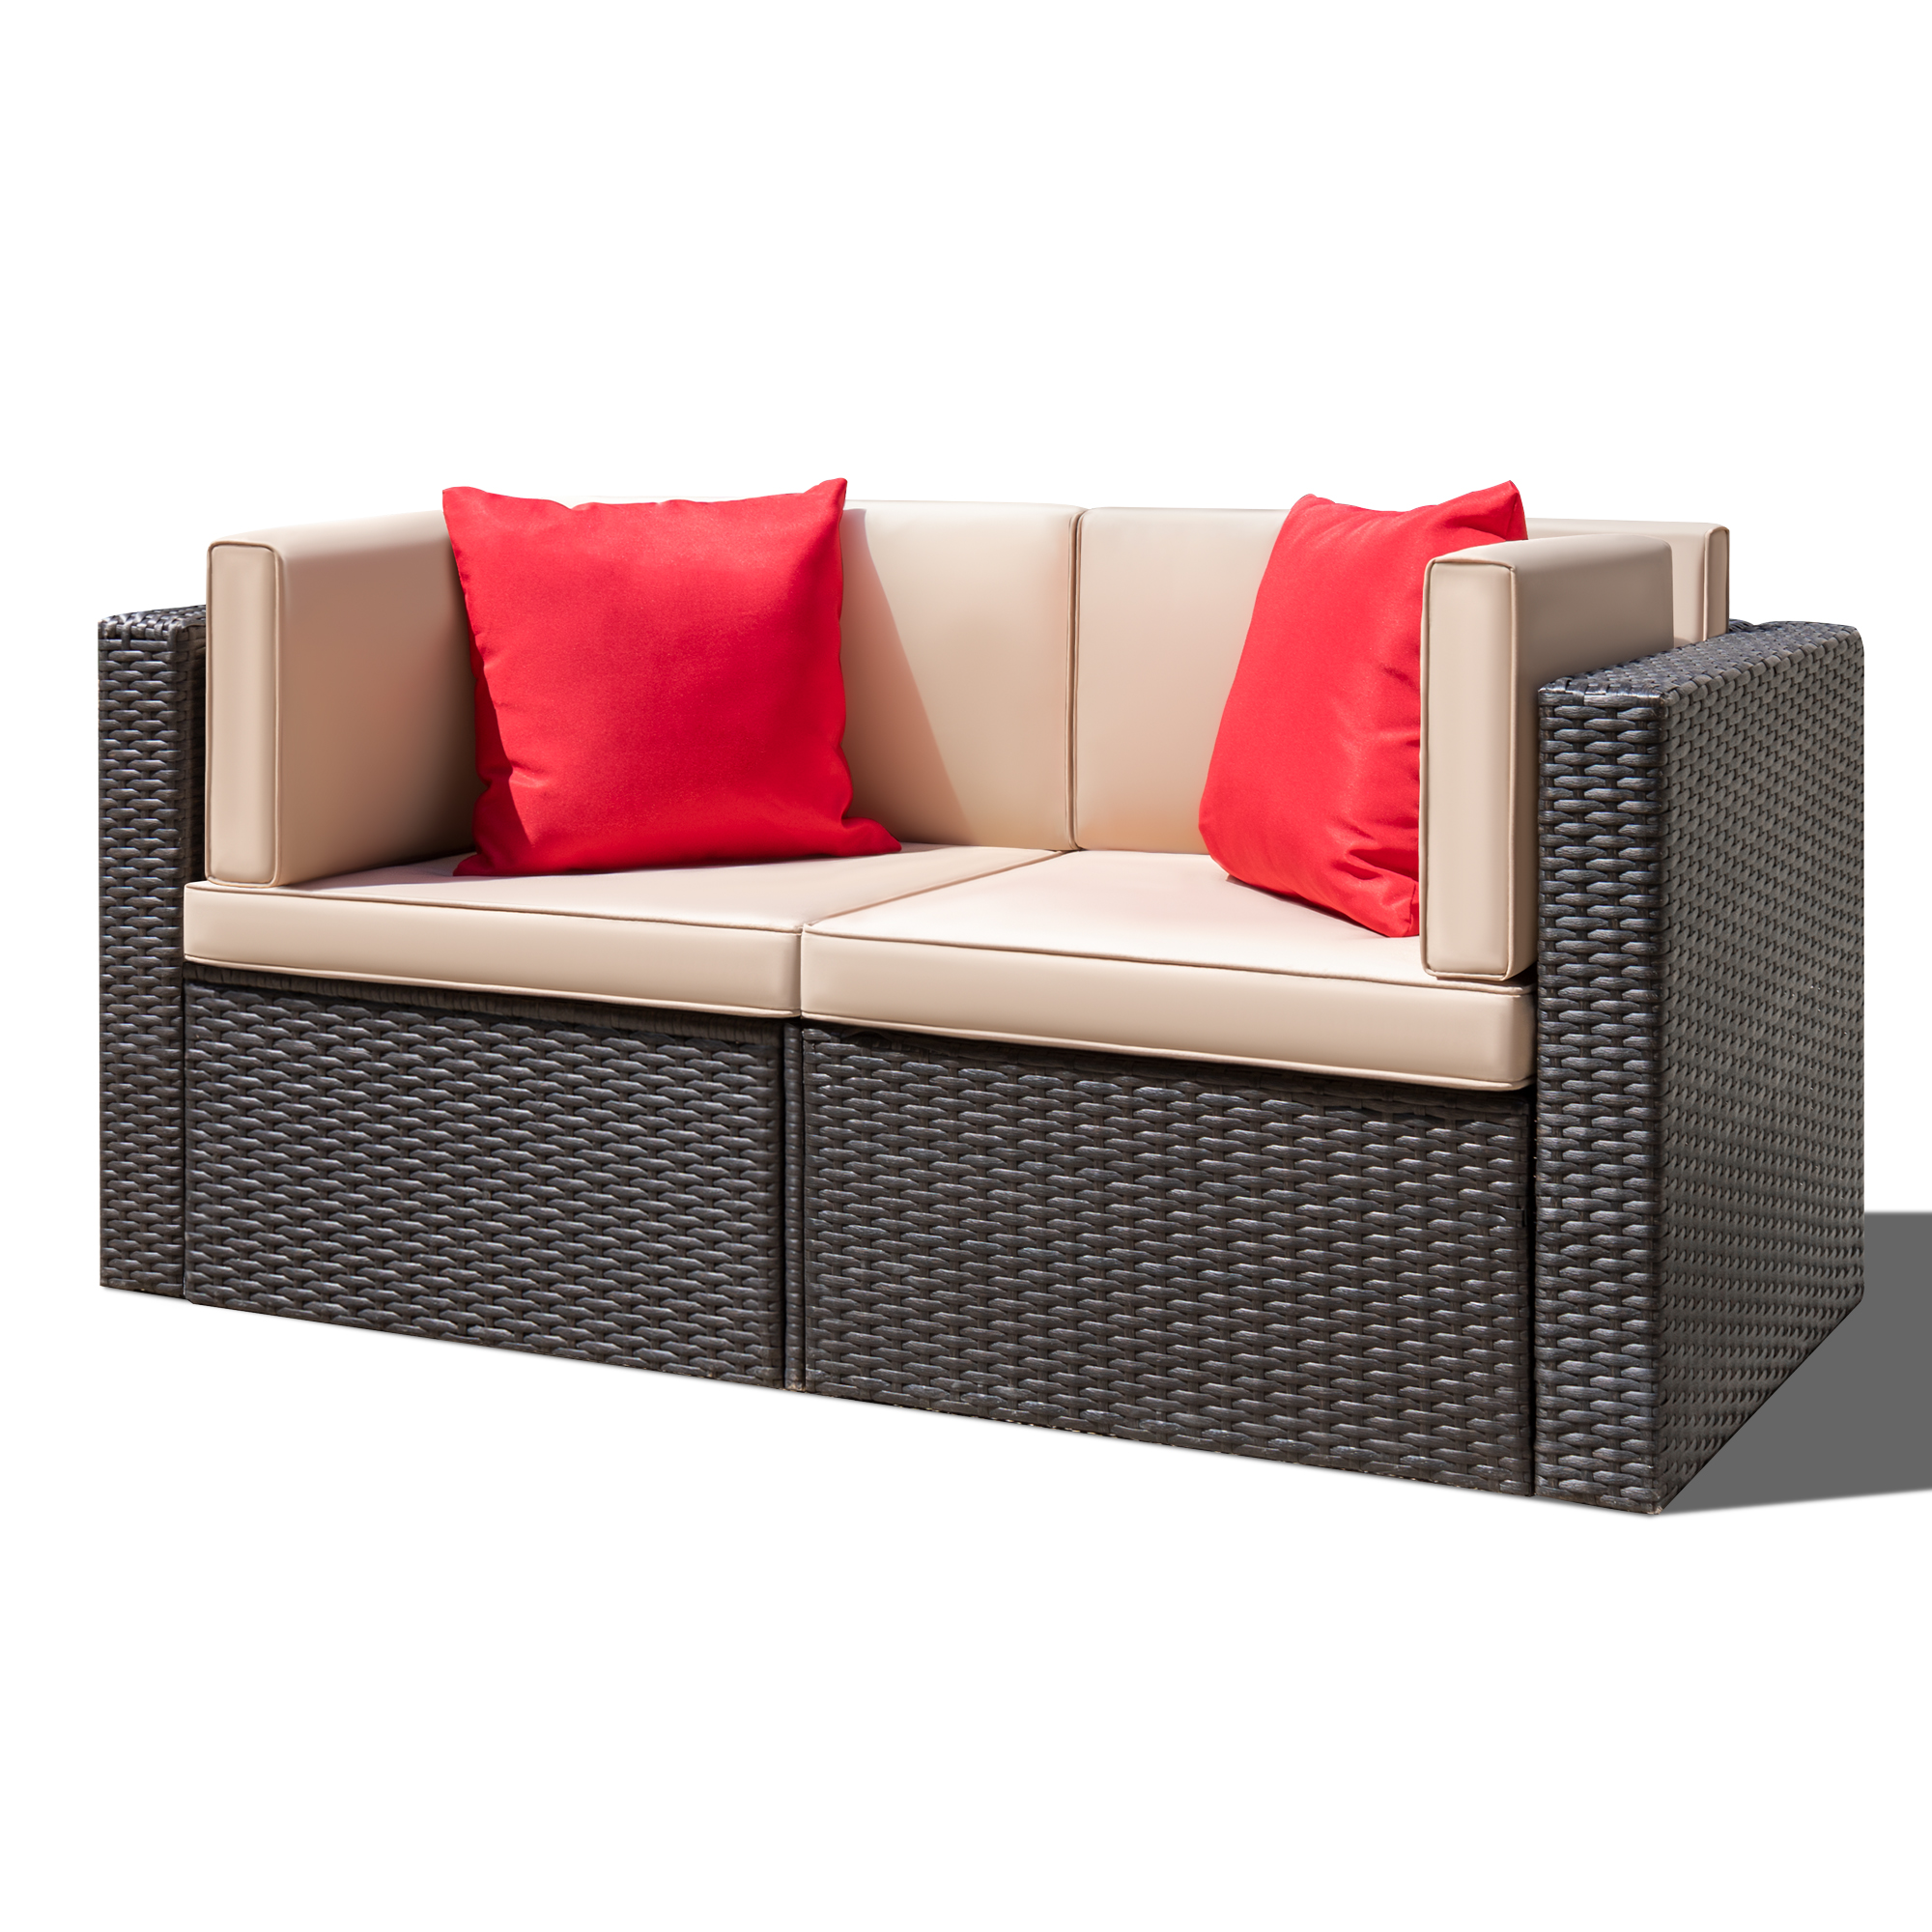 Lacoo 2 Pieces Patio Loveseat Outdoor Sectional Sofa Patio Conversation Set for Small Area, Beige - image 2 of 5